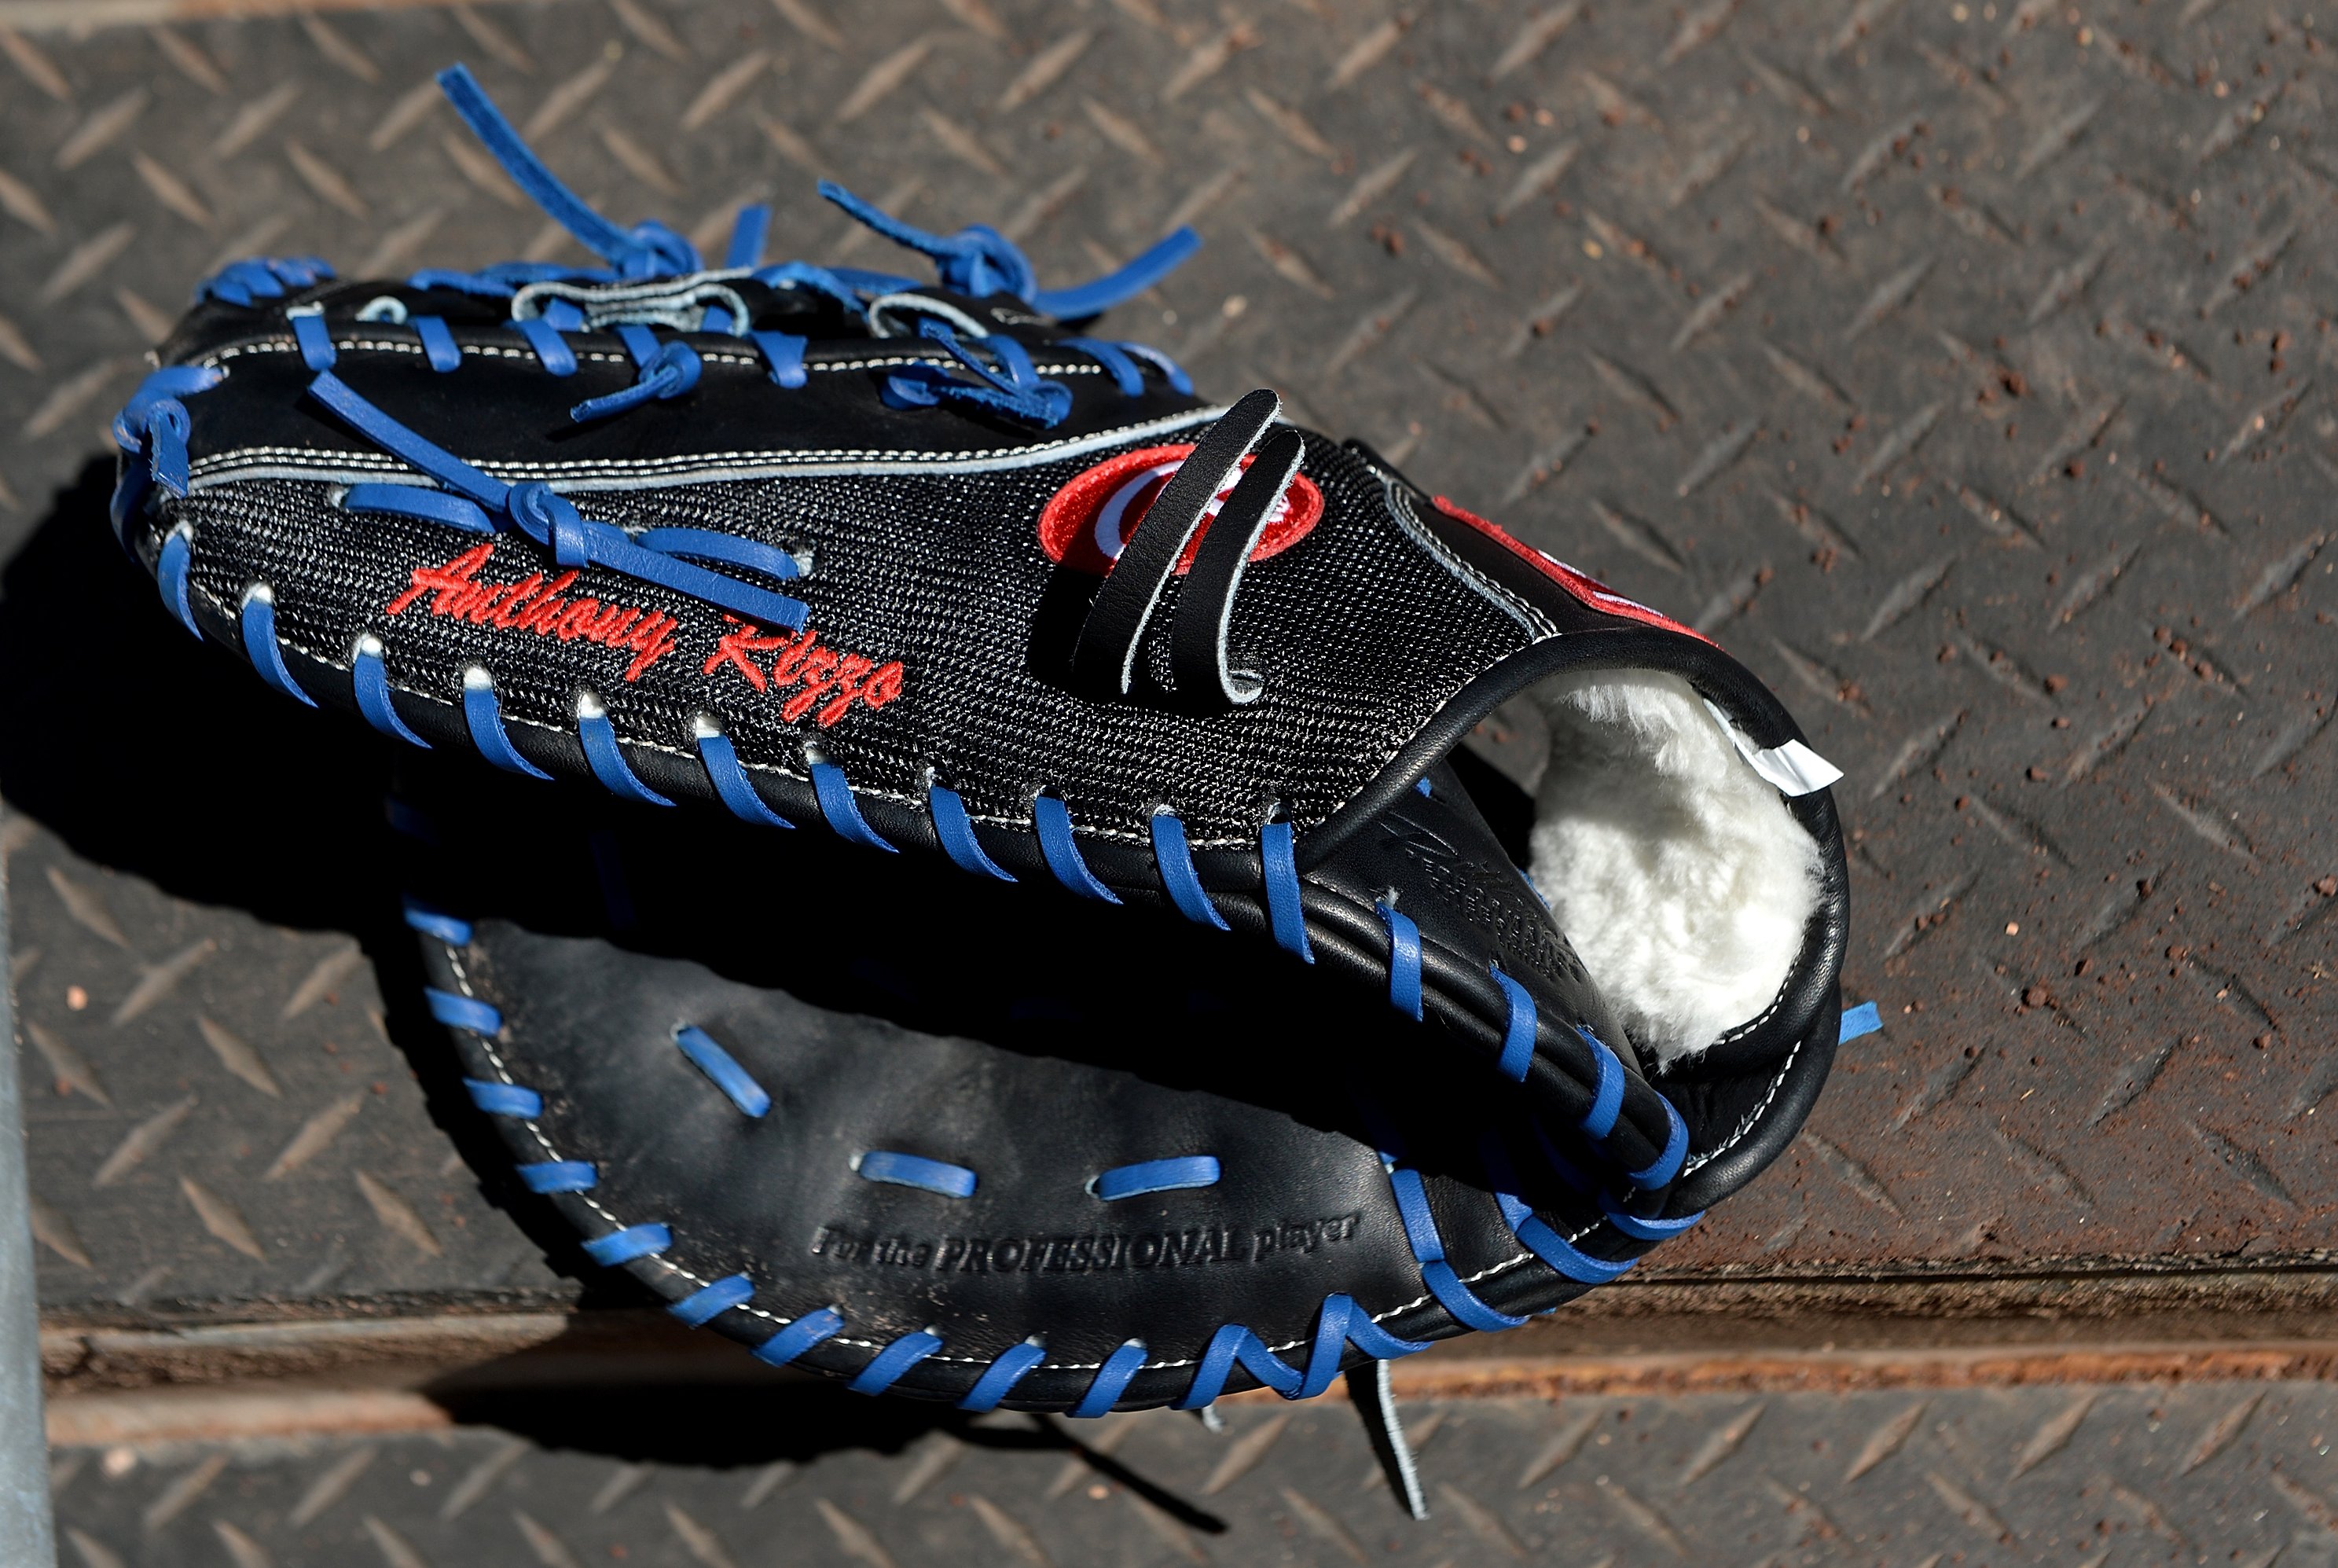 Does anyone use Glove Locks? Are they any good or mostly a swag thing :  r/BaseballGloves